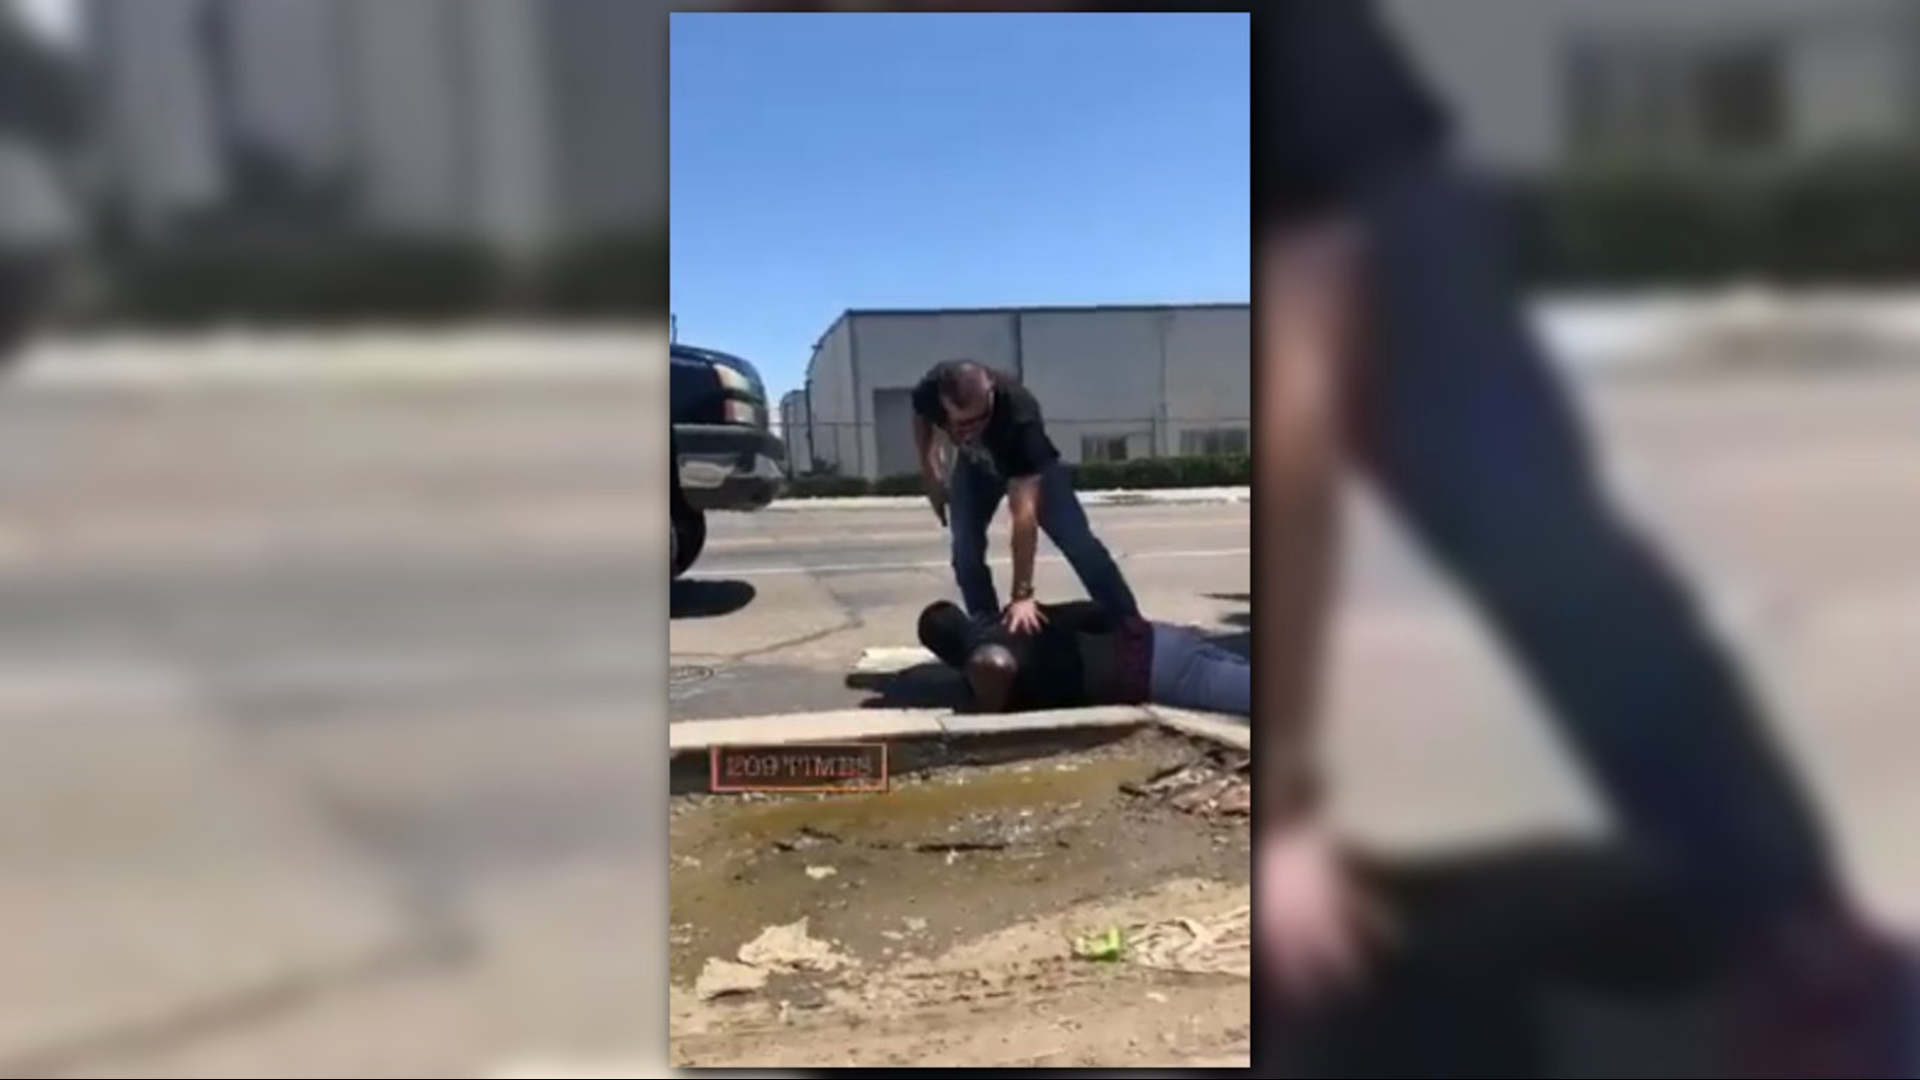 The Stockton Police Department is reviewing a traffic incident caught on video where an off-duty officer detained a man at gunpoint on State Highway 99.